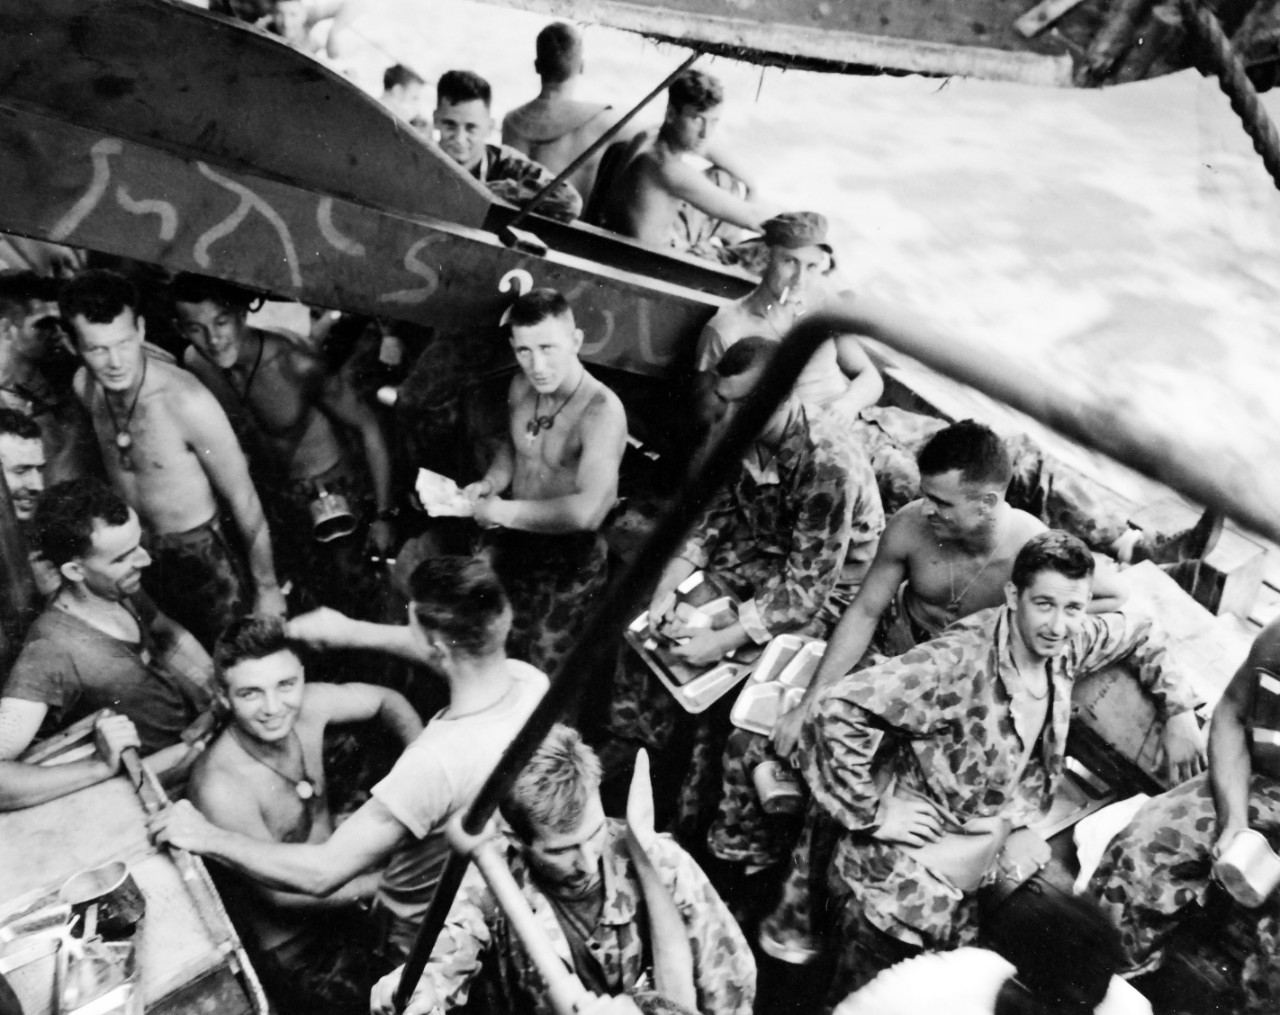 80-G-202476:   Bougainville Campaign, November 1943-August 1945.    USS Kilty (APD-15).   U.S. Marines awaiting chow enroute to Empress Augusta Bay to reinforce beachhead established on November 1.   Photographed November 5, 1943.  Official U.S. Navy Photograph, now in the collections of the National Archives.  (2018/02/21).  